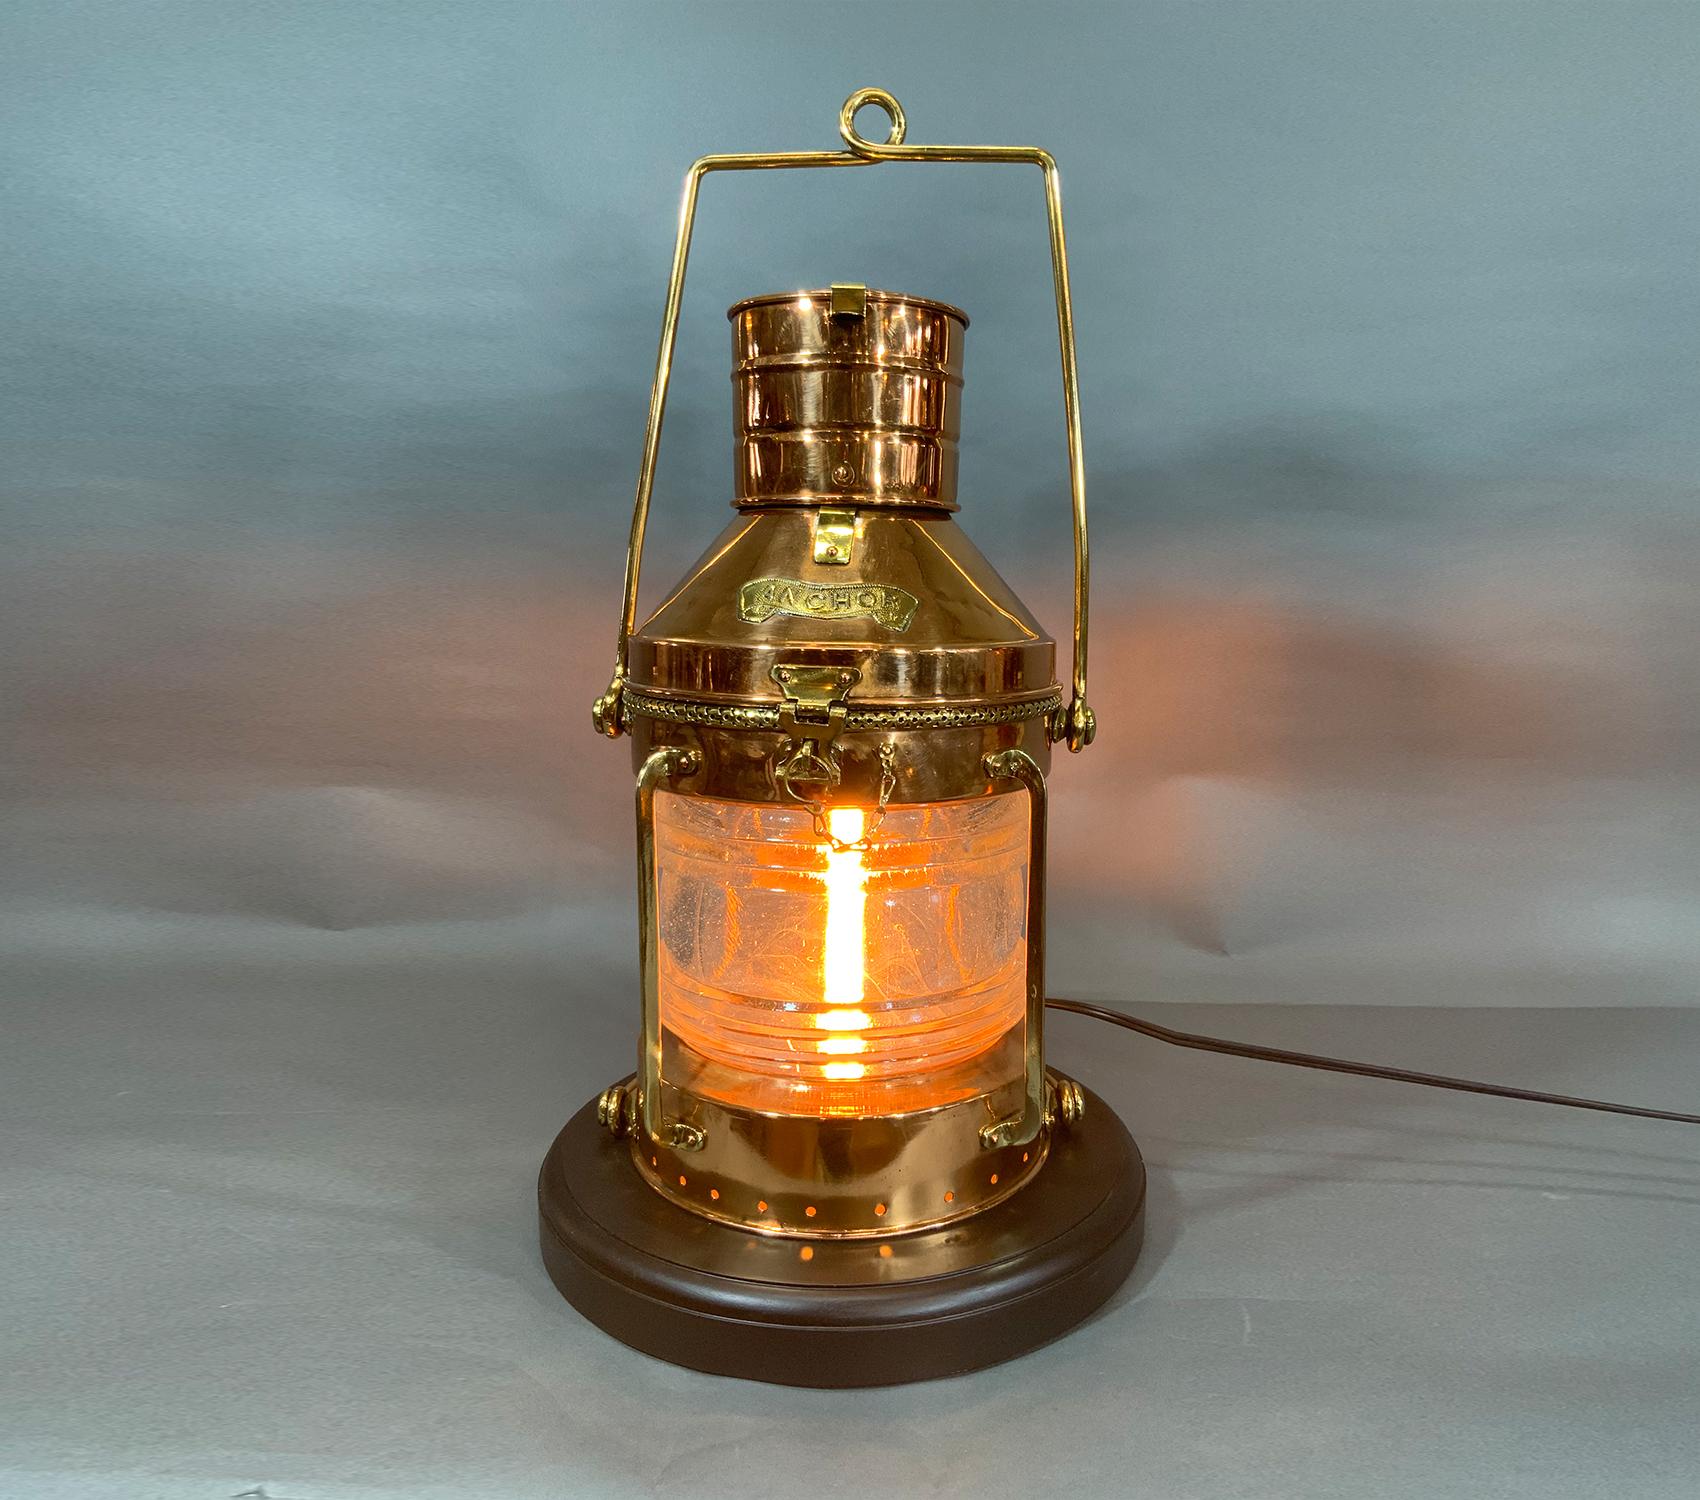 Ships anchor lantern of solid copper with brass handles, bars, hasp, hinge, etc. Mounted to a thick wood base. Wired for home use. Condition good, couple of dents.

Weight: 19 LBS
Overall Dimensions: 21